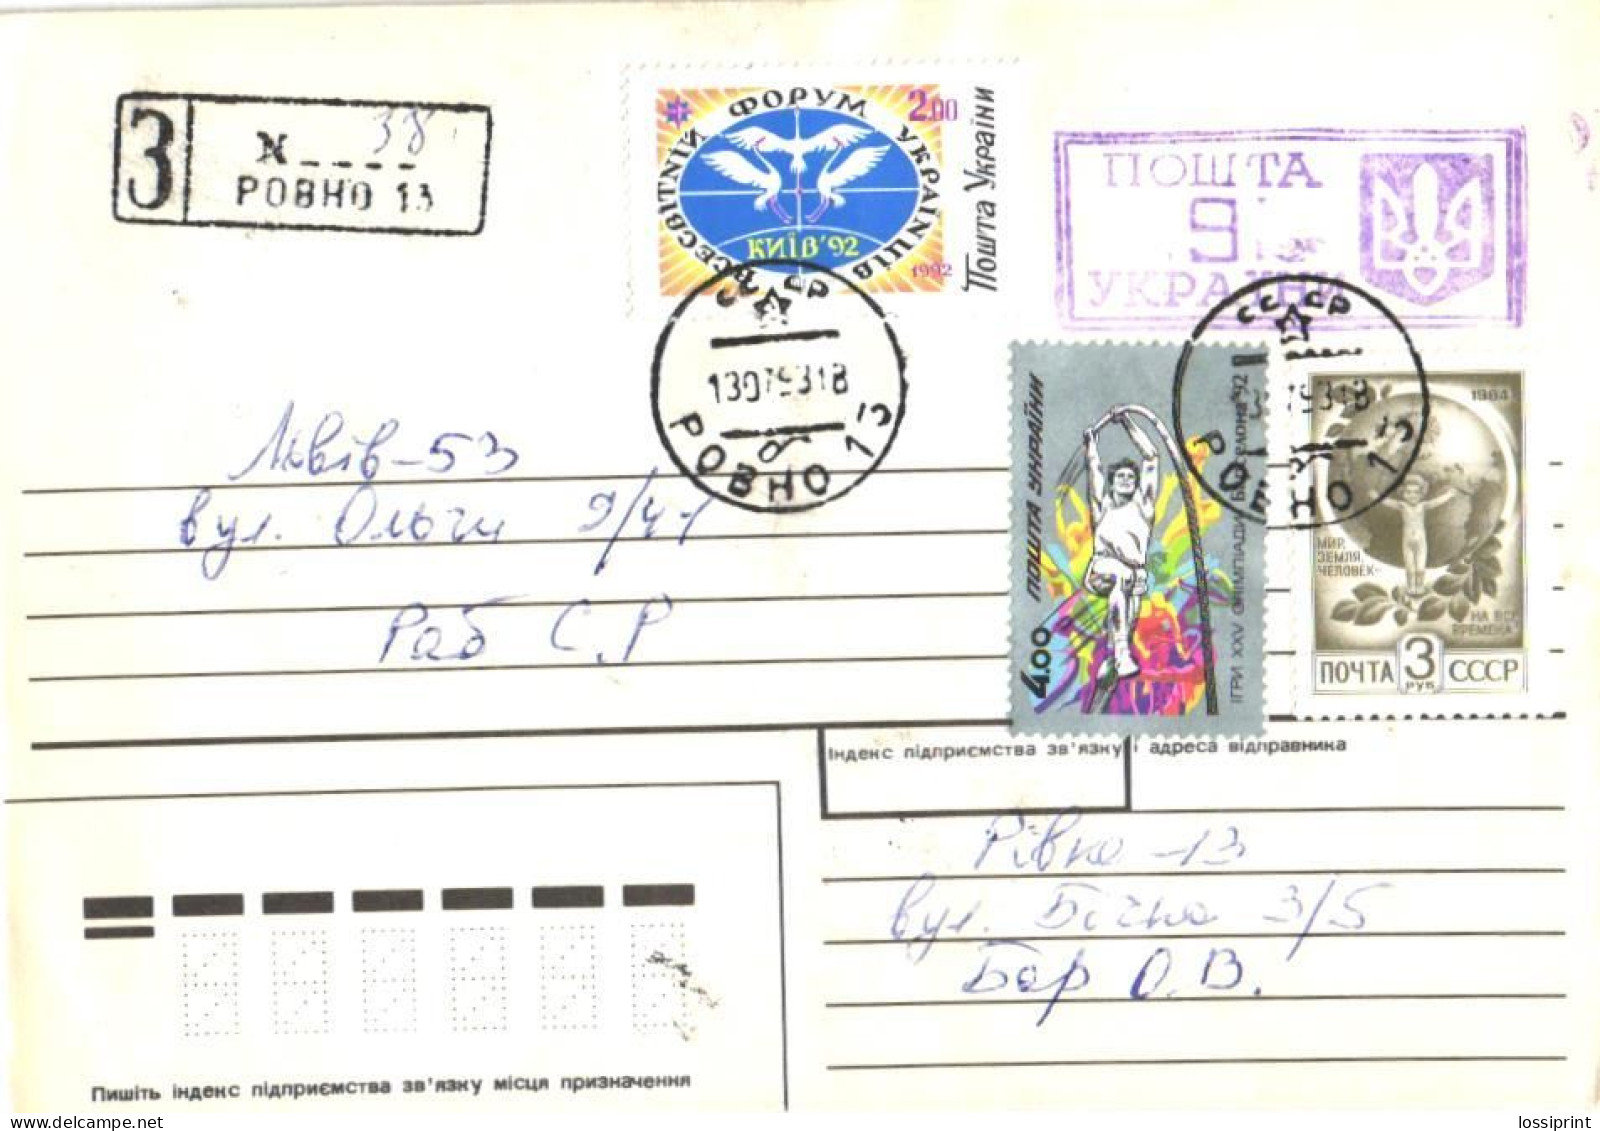 Ukraine:Ukraina:Registered Letter From Rovno13 With Soviet Unioln And Ukraine Stamps And Cancellation, 1993 - Ucraina